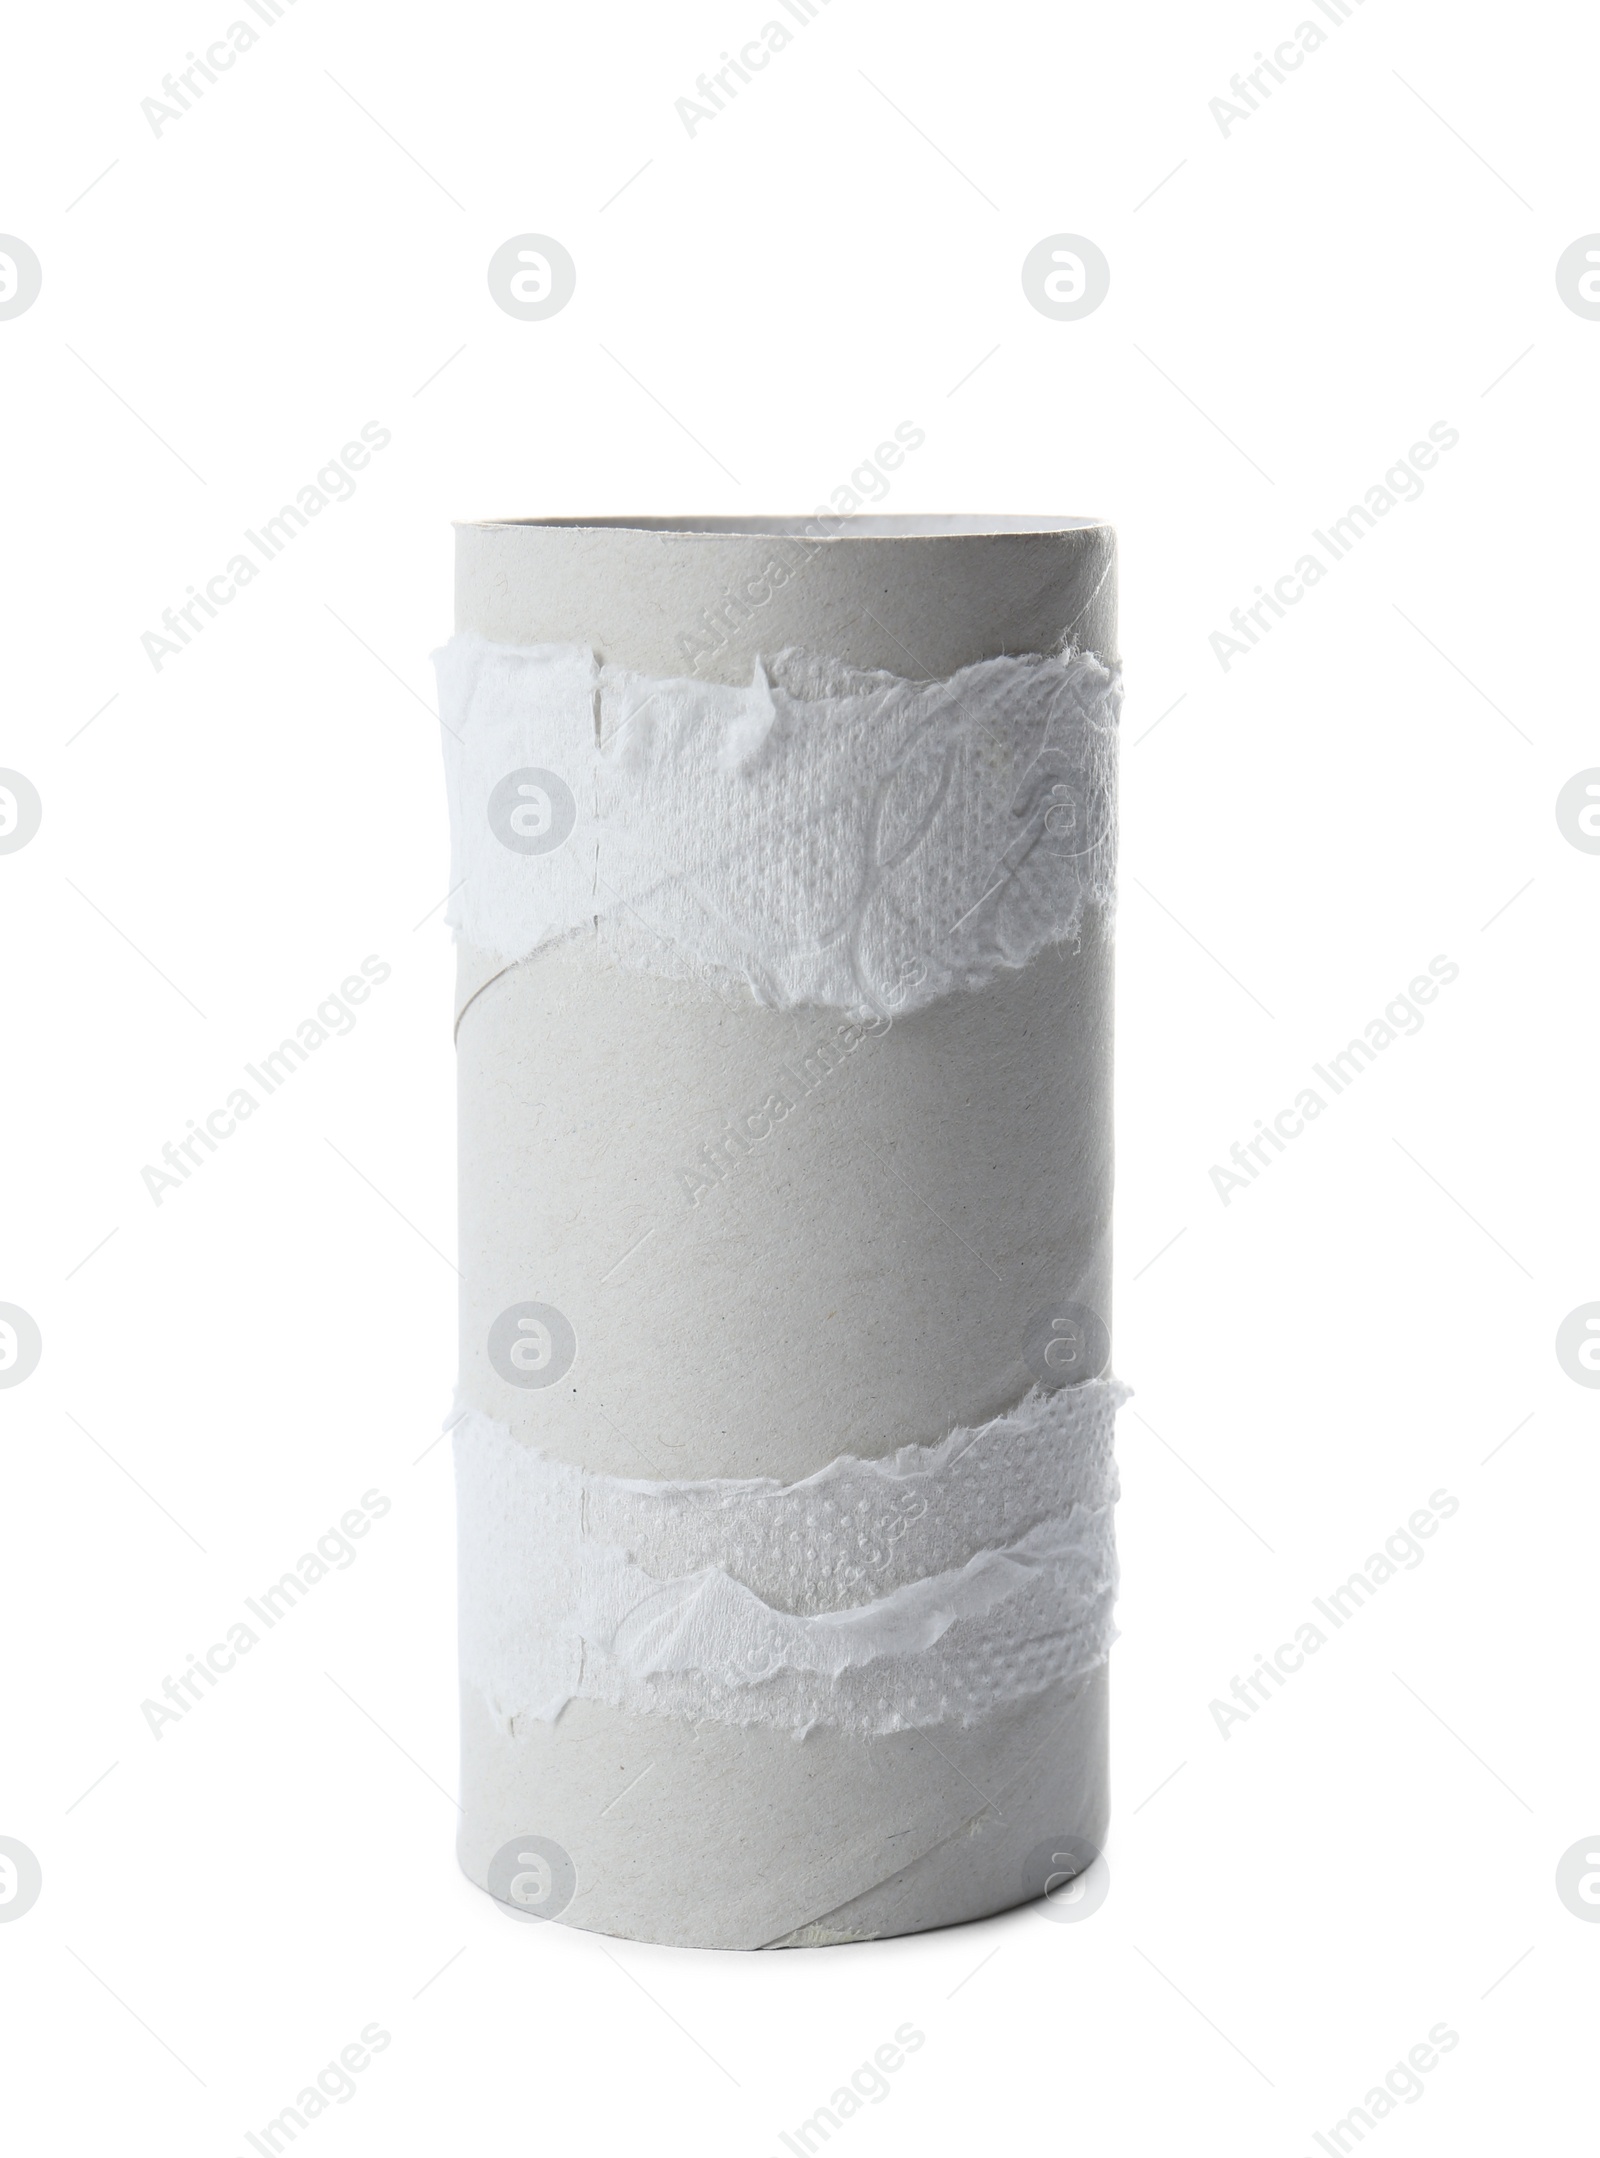 Photo of Empty toilet paper roll on white background